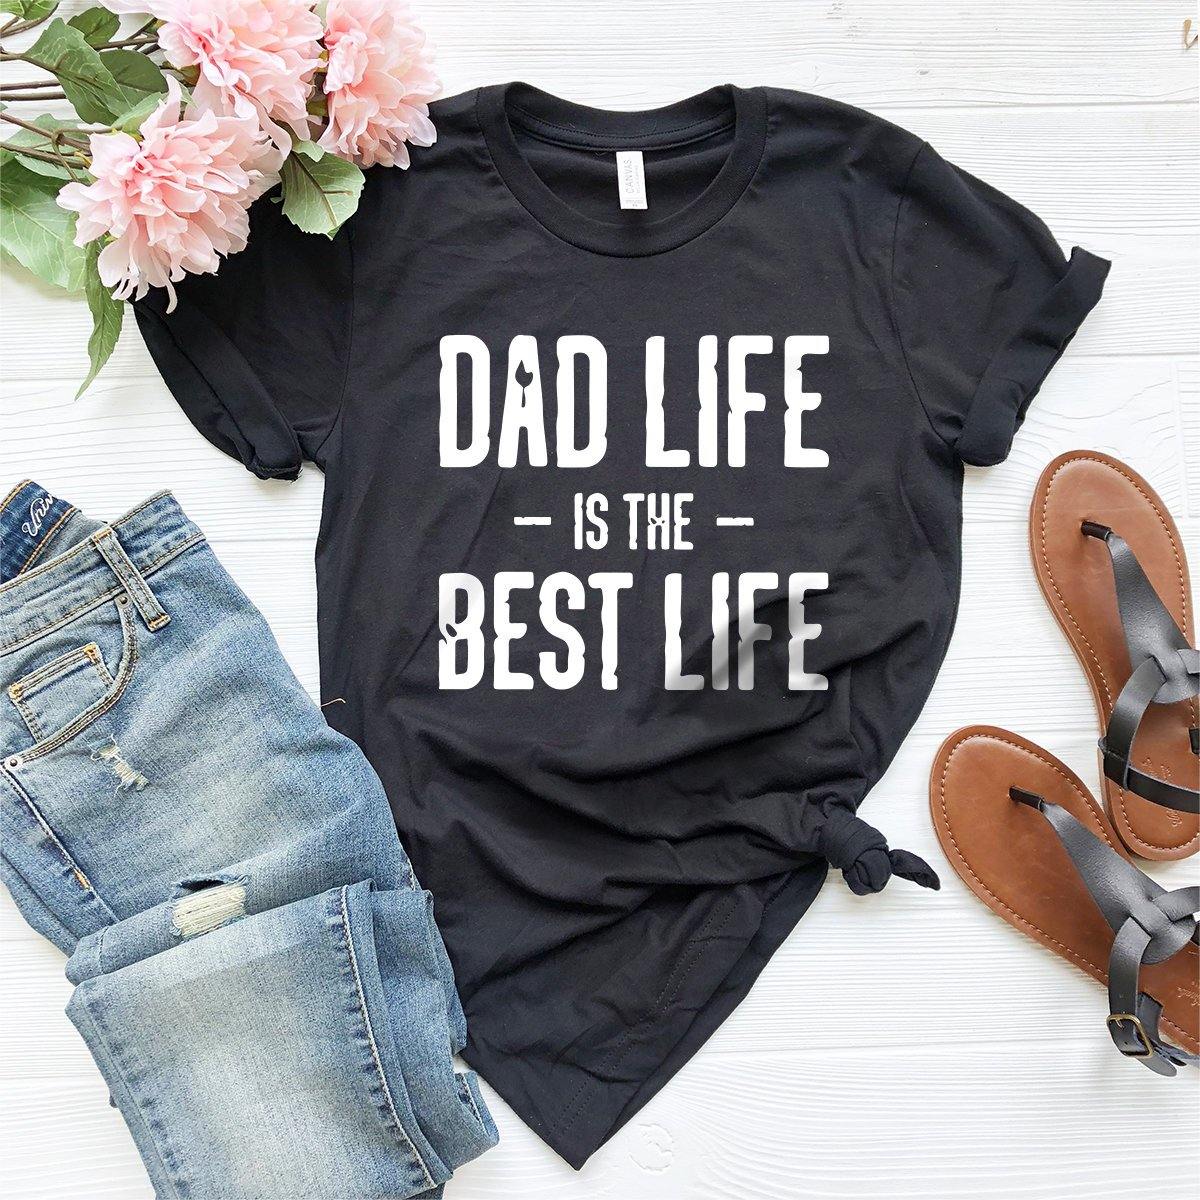 Dad Life Shirt, Dad Shirt, Dad Life Is The Best Life Shirt, Funny Dad Shirt, Dad Birthday Gift, Fathers Day Shirt, Gift For Daddy, Dad Tee - Fastdeliverytees.com